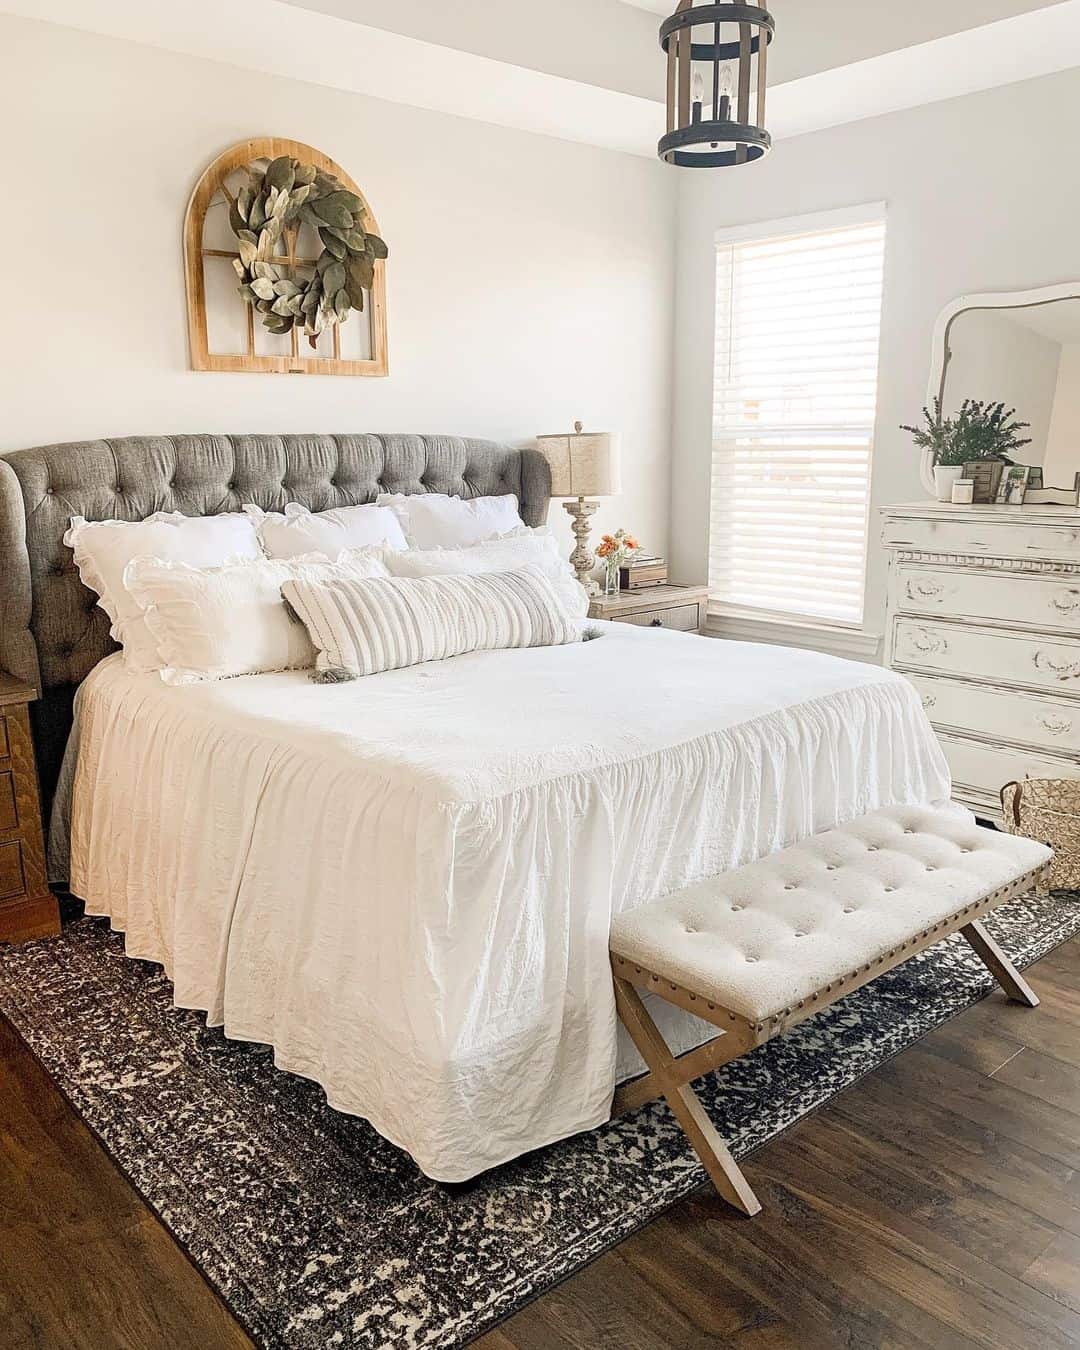 Master Bedroom With Farmhouse-inspired Details - Soul & Lane